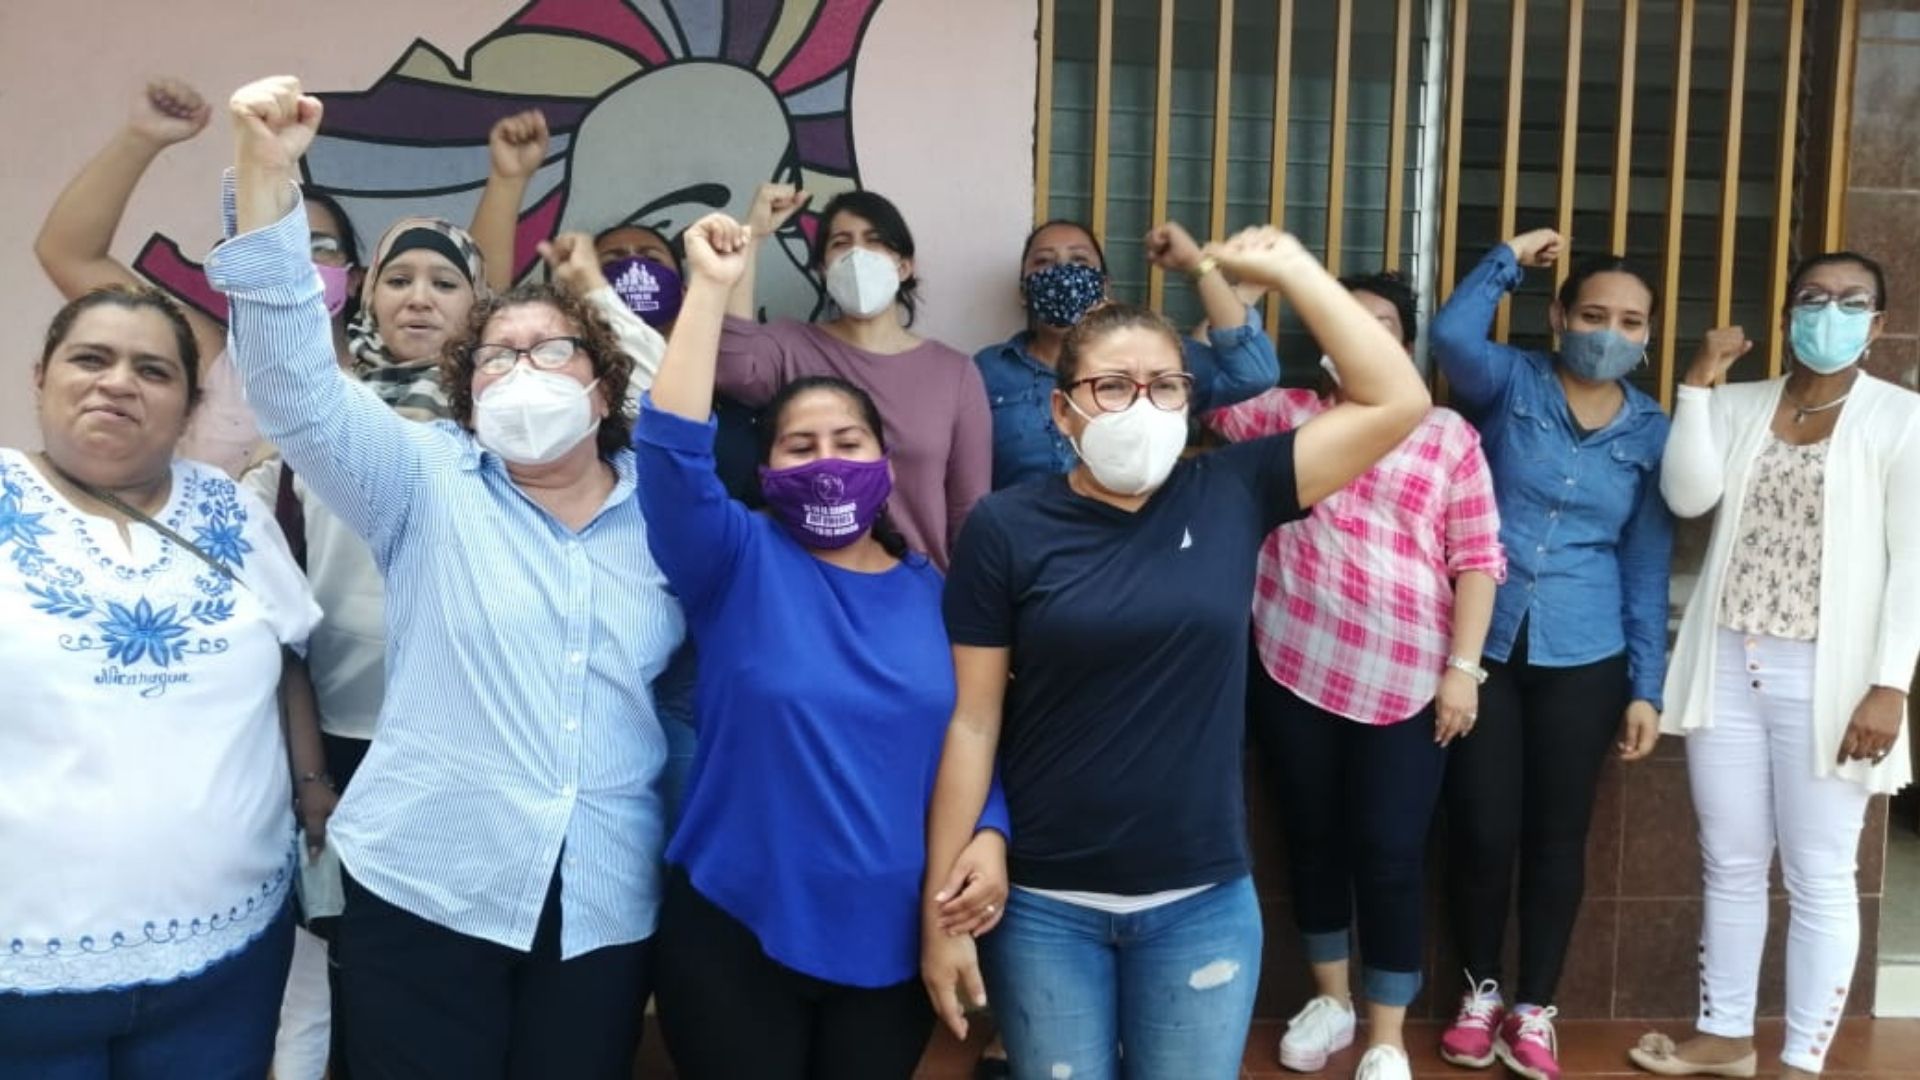 Women defenders condemn the closure of 57 NGOs in Nicaragua that work for women's rights